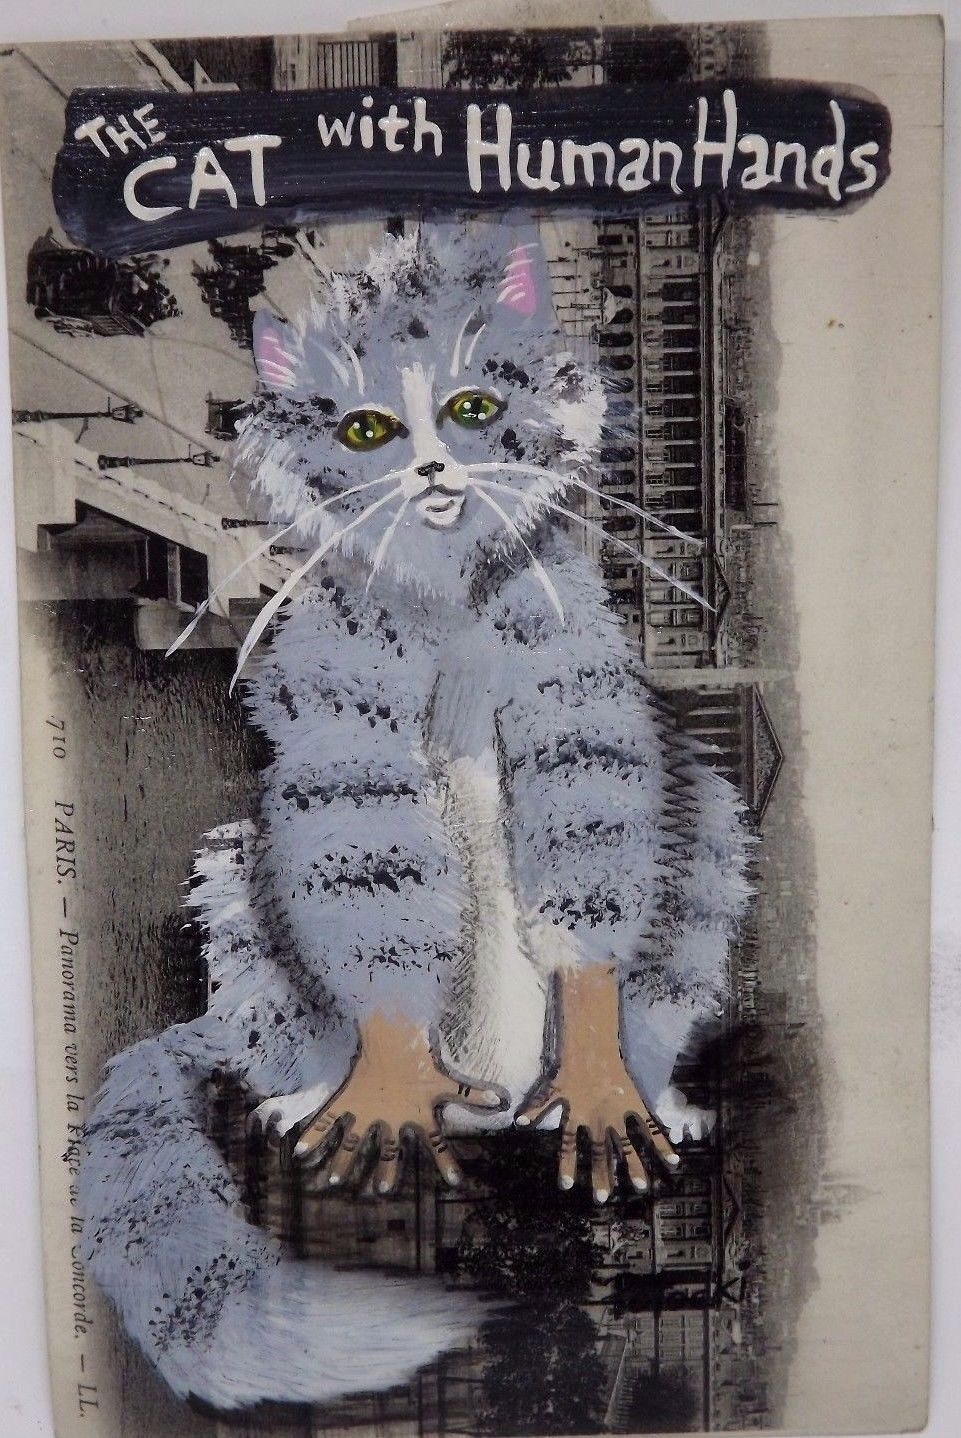 The Cat with Hands acrylic painting